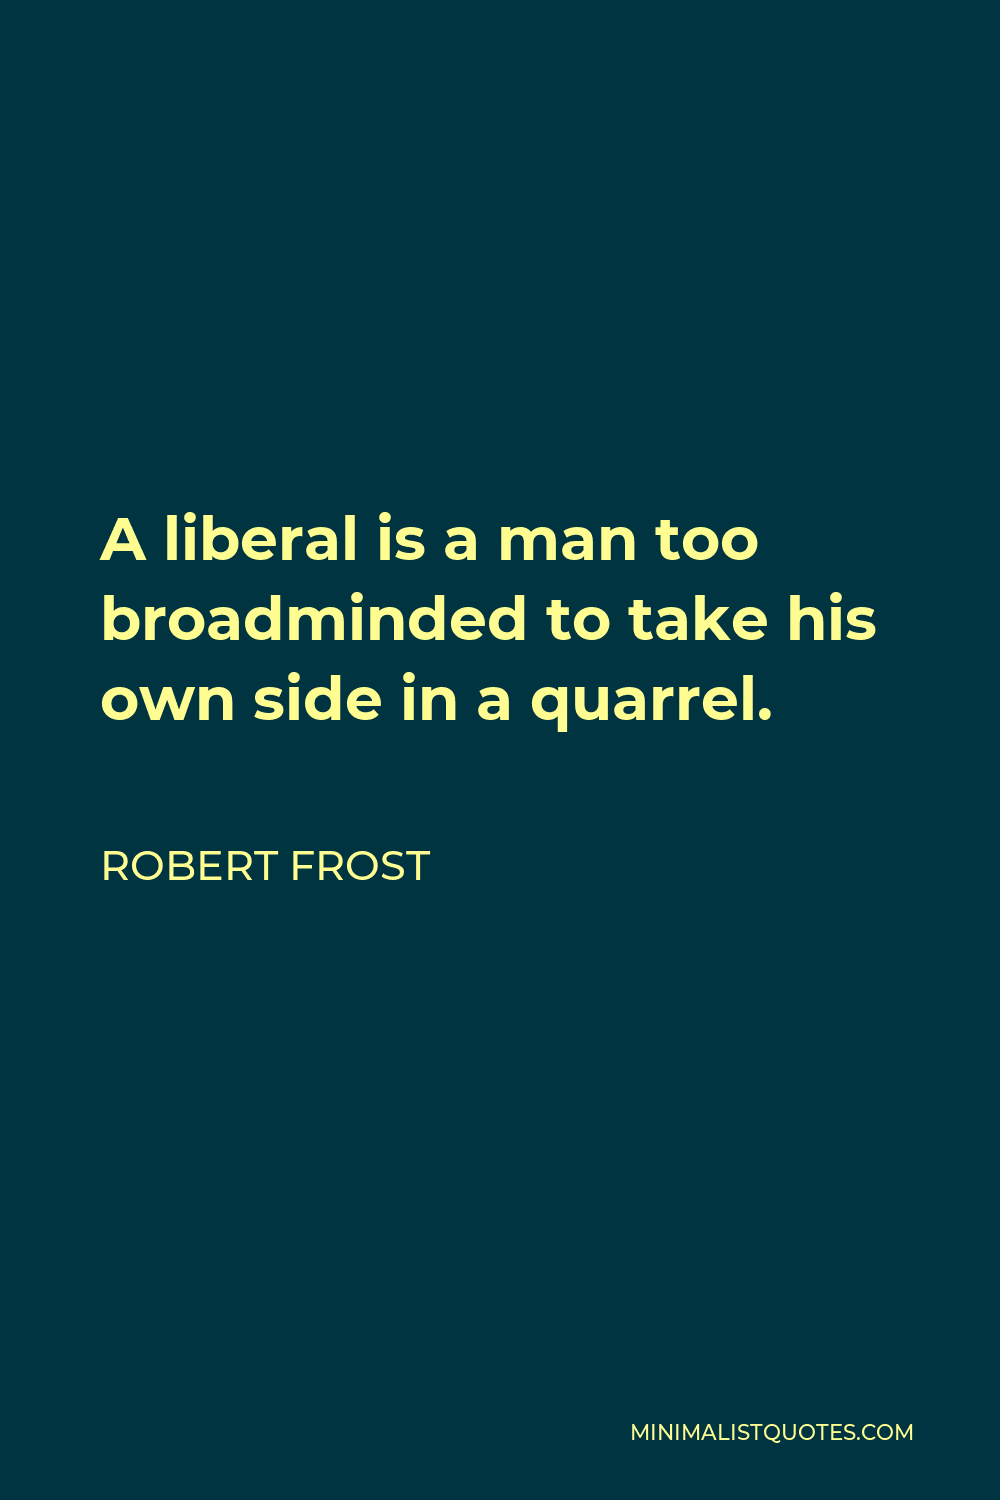 Robert Frost Quote - A liberal is a man too broadminded to take his own side in a quarrel.